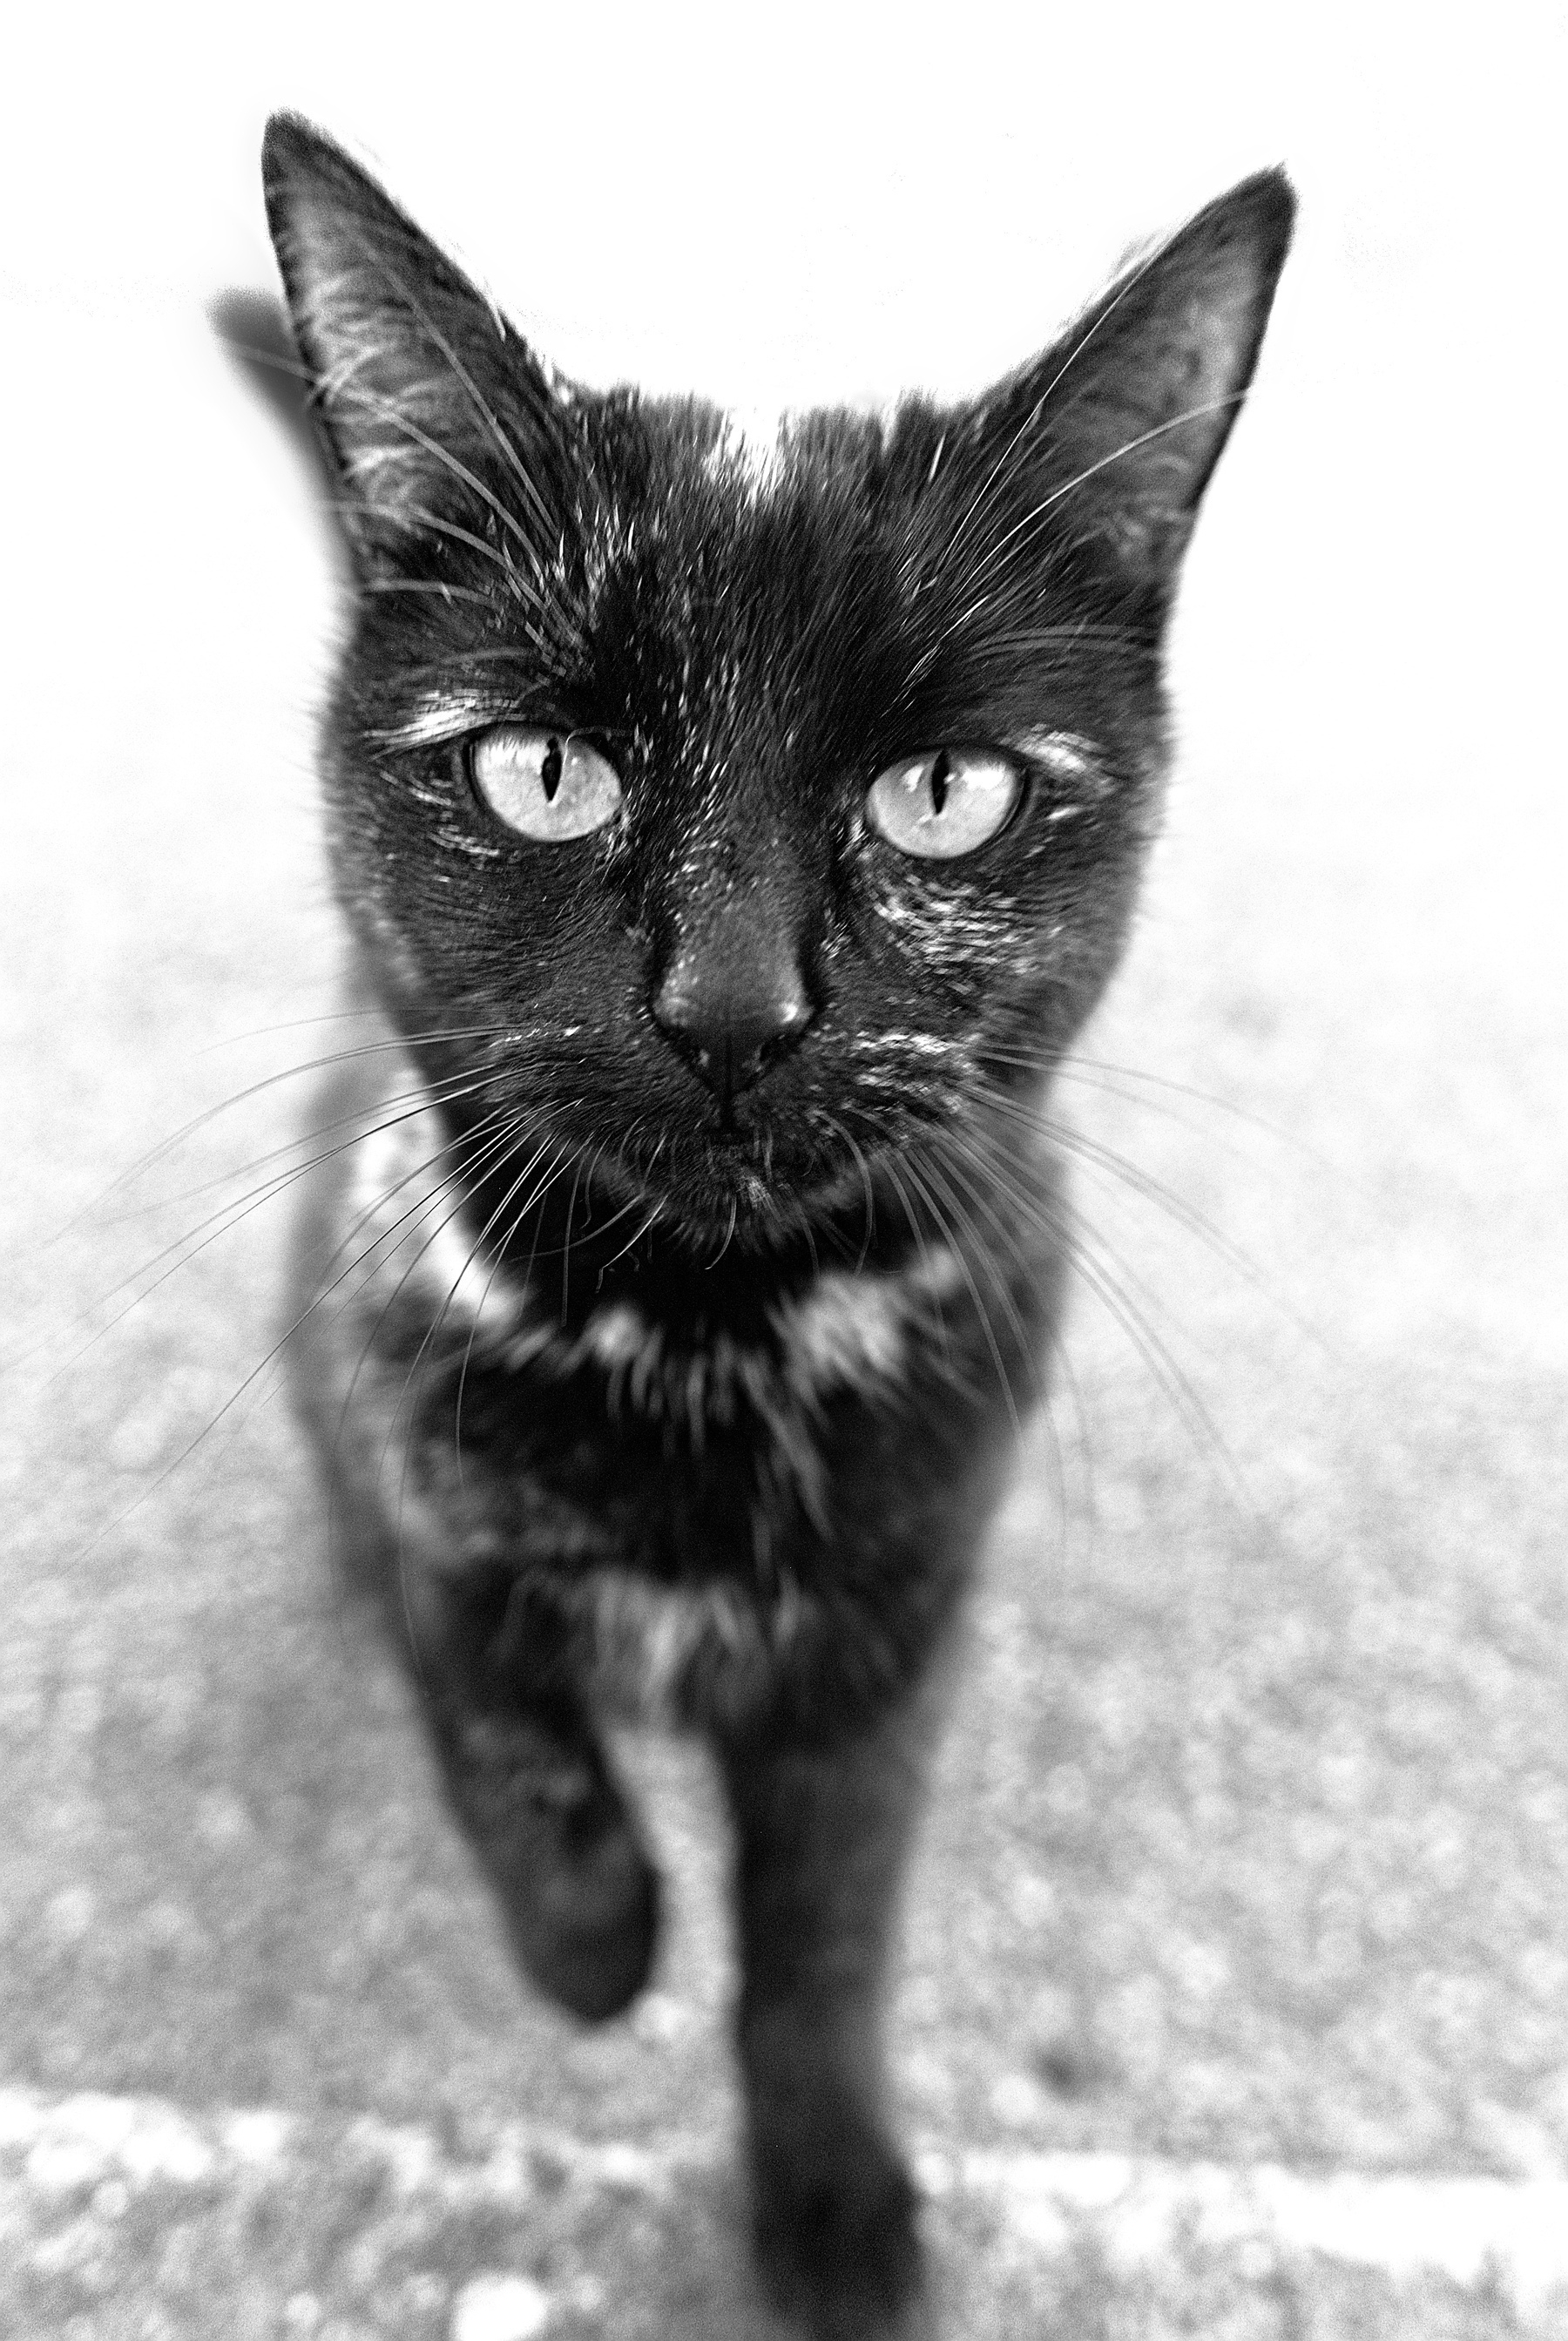 A black and white photo of a black cat with tortoise shell markings approaching the lens. The background appears to be a street